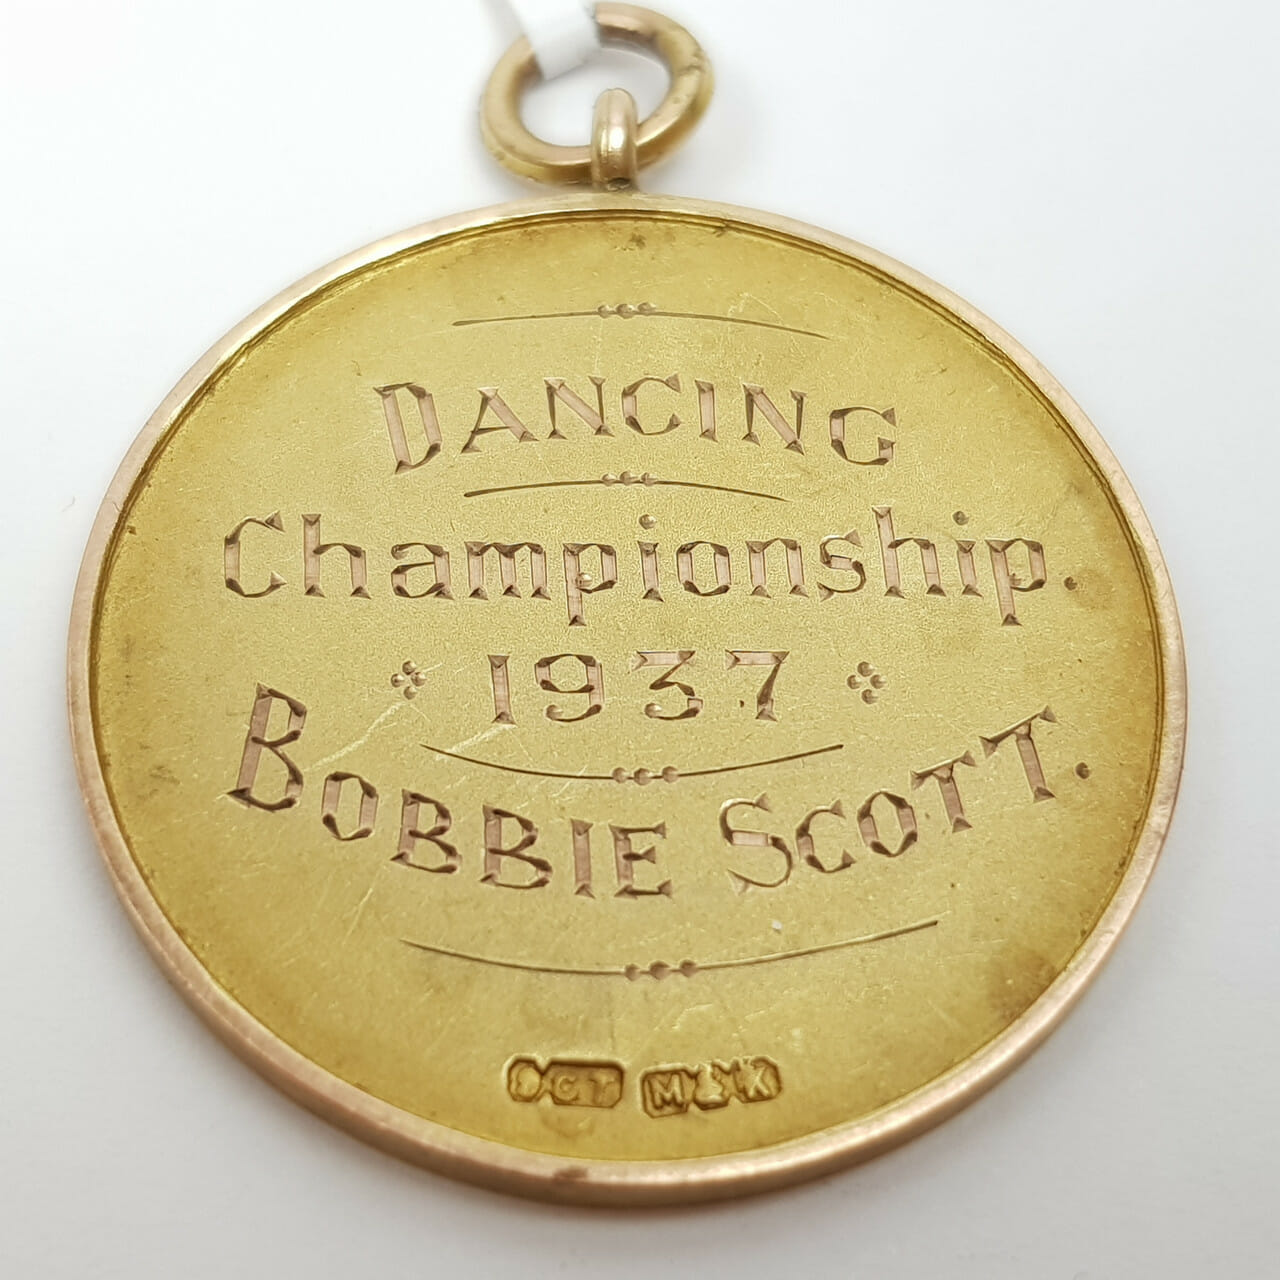 9CT 9.7GR YELLOW GOLD MEDALLION - WELLINGTON COMPETITIONS DANCING CHAMPIONSHIP #43114